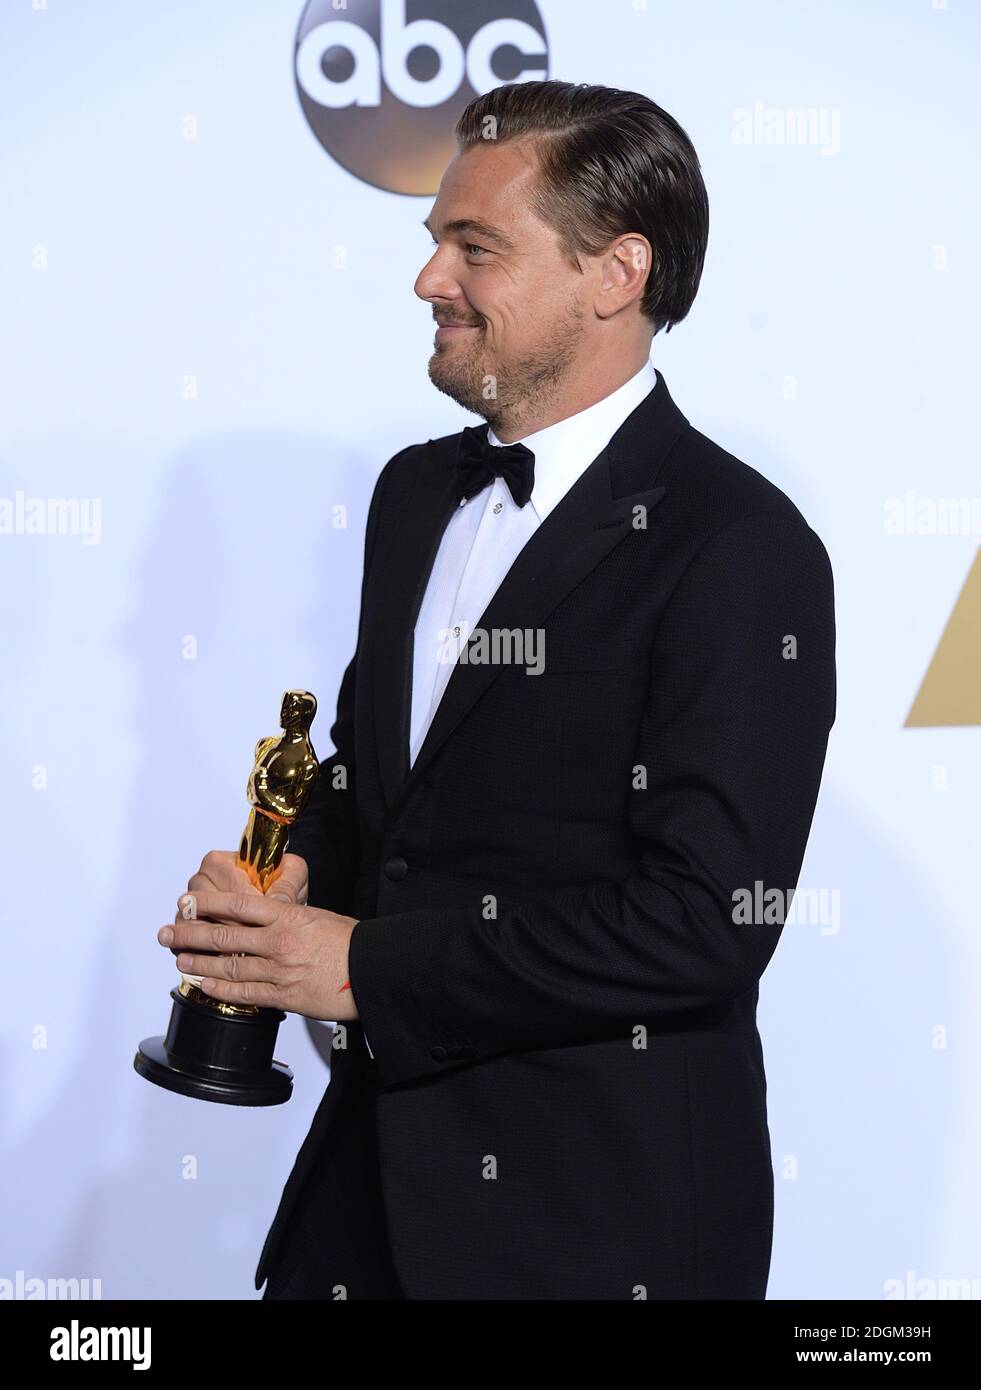 Leonardo DiCaprio with the Oscar for Best Actor for 'The Revenant' in the press room of the 88th Academy Awards held at the Dolby Theatre in Hollywood, Los Angeles, CA, USA, February 28, 2016. Stock Photo